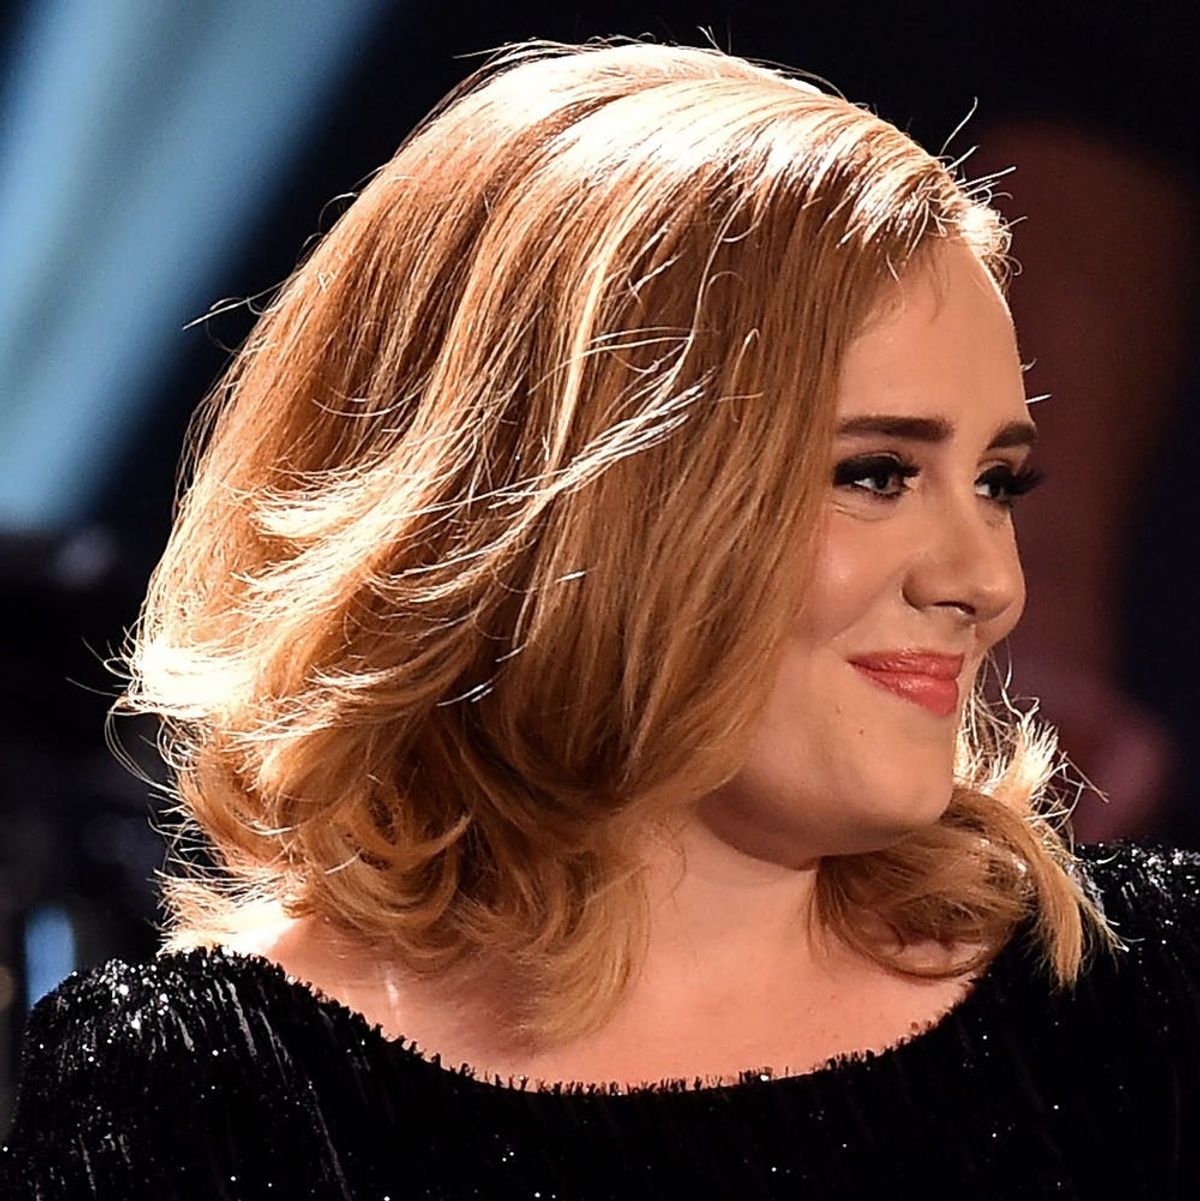 Why Adele Might Get You to Step Away from Social Media in the New Year